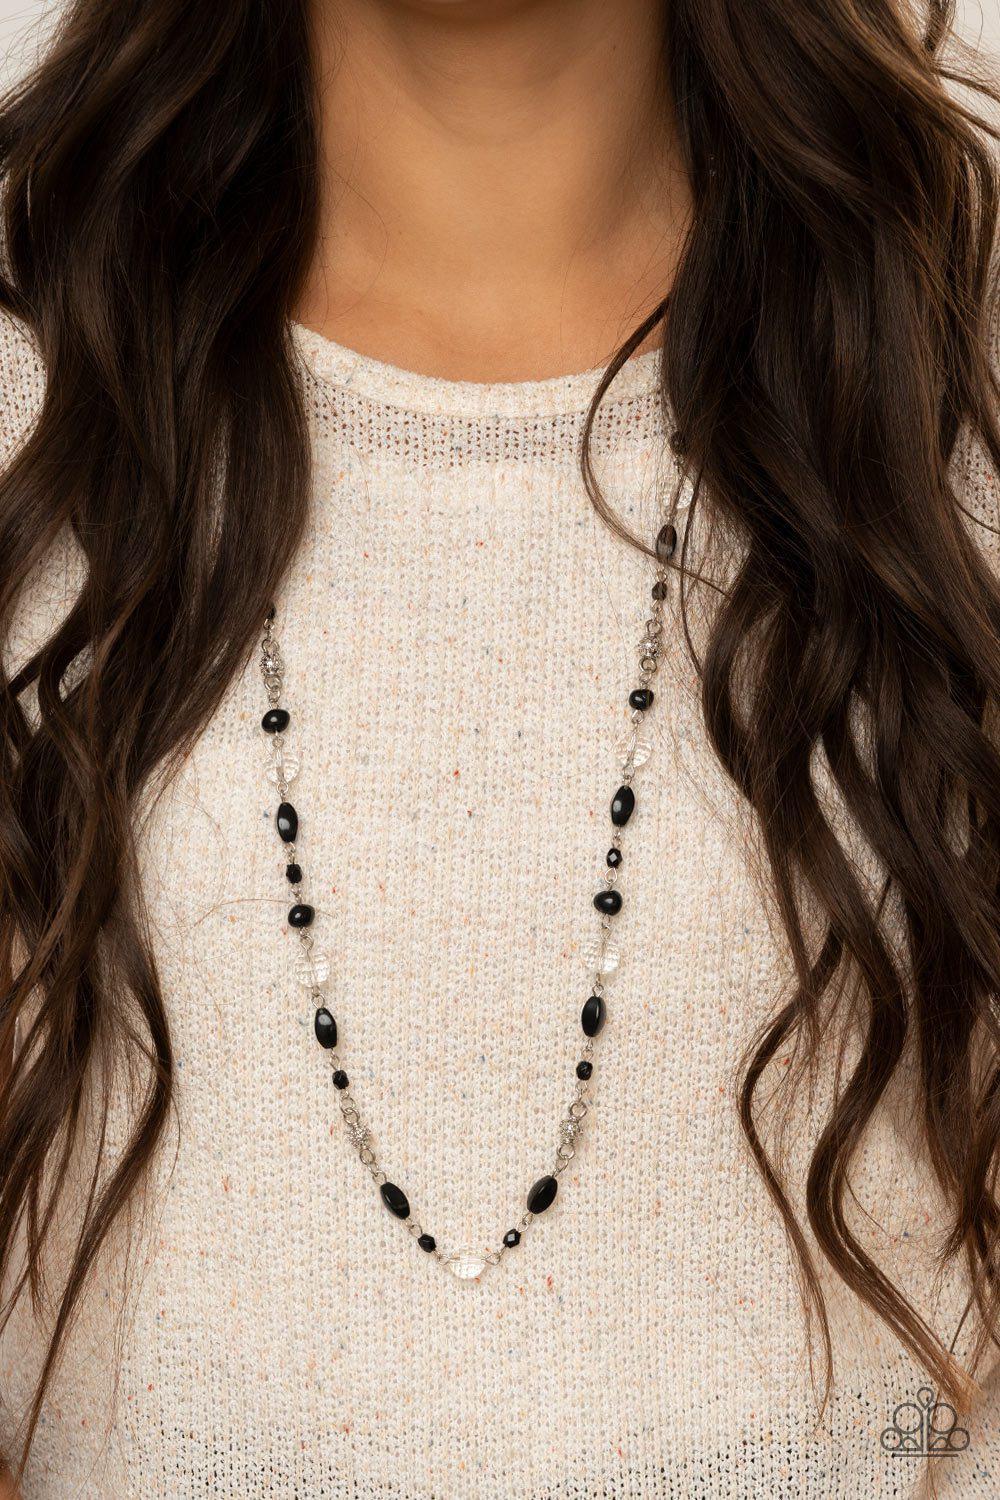 Twinkling Treasures Black and White Necklace - Paparazzi Accessories - model -CarasShop.com - $5 Jewelry by Cara Jewels